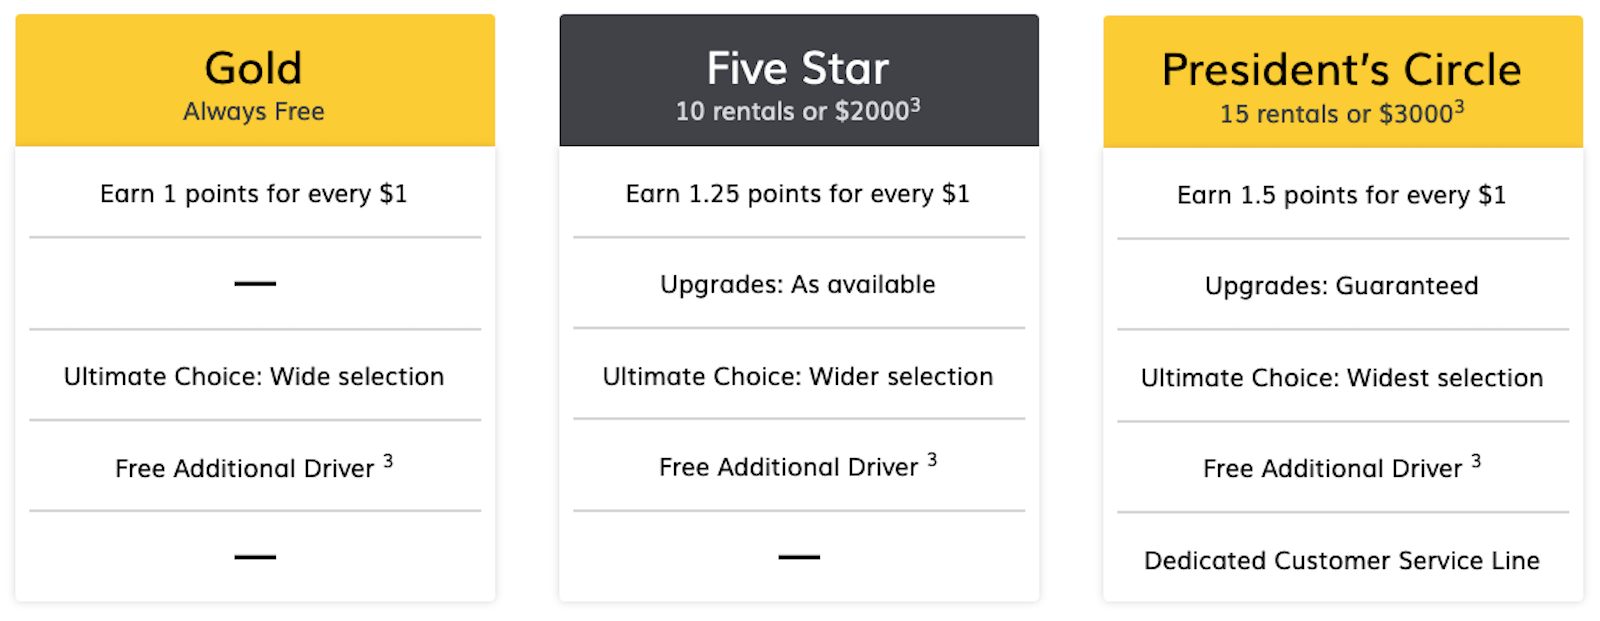 Comparing car rental elite status - The Points Guy - The Points Guy